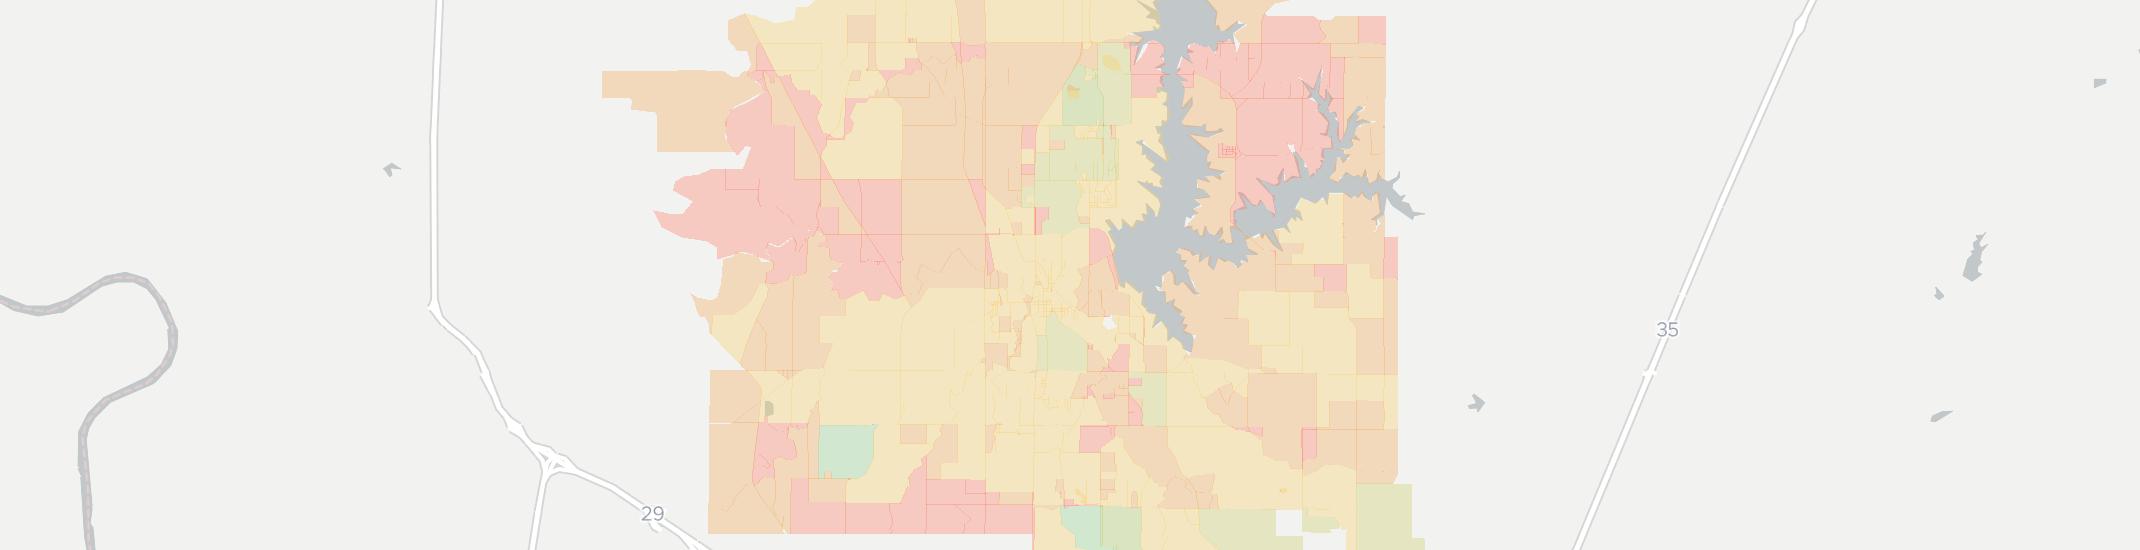 Smithville Internet Competition Map. Click for interactive map.